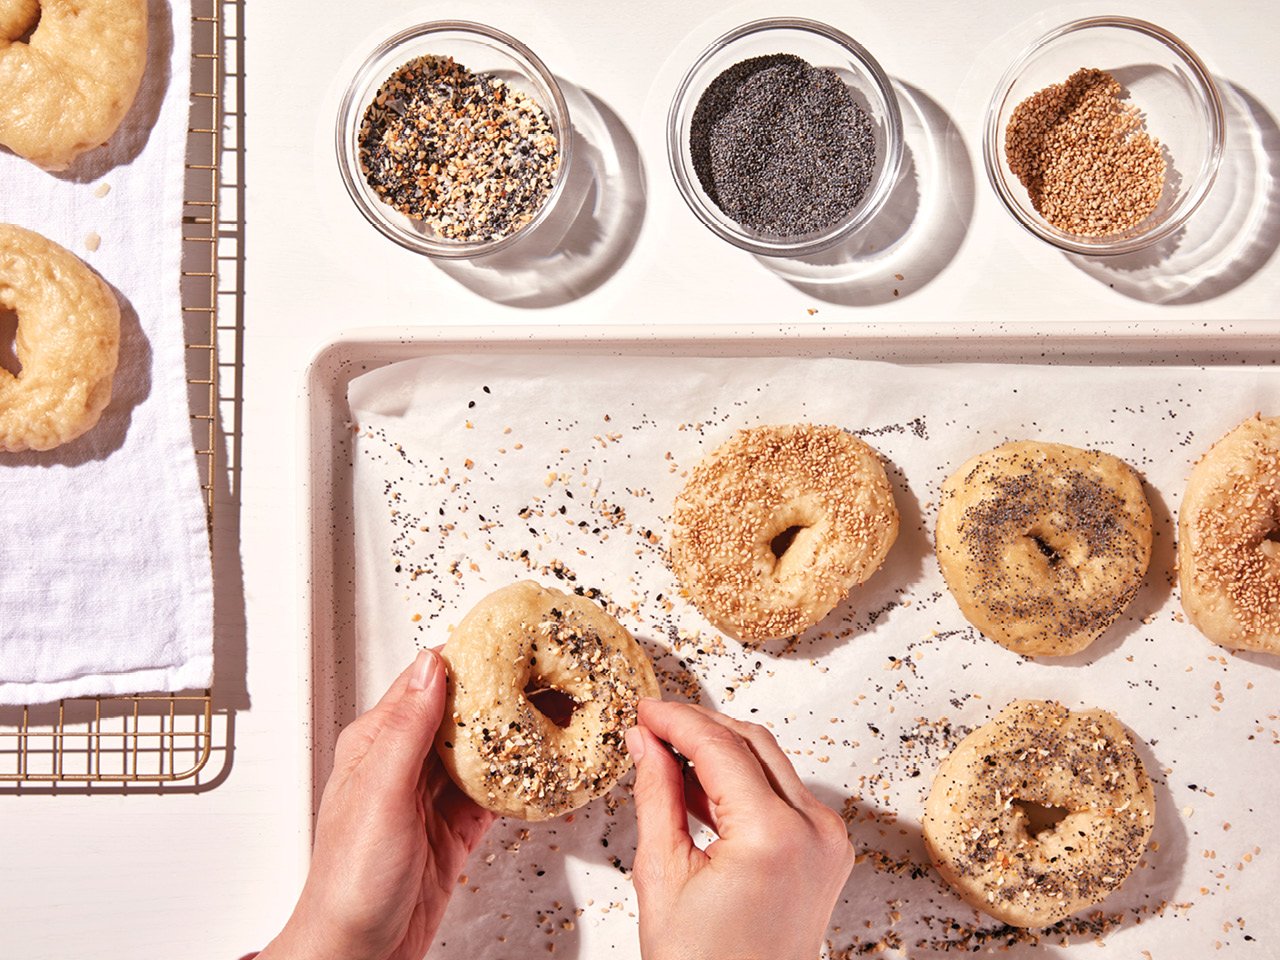 A photo of a person's hands covering homemade bagel in a mixture of sesame and poppy seeds